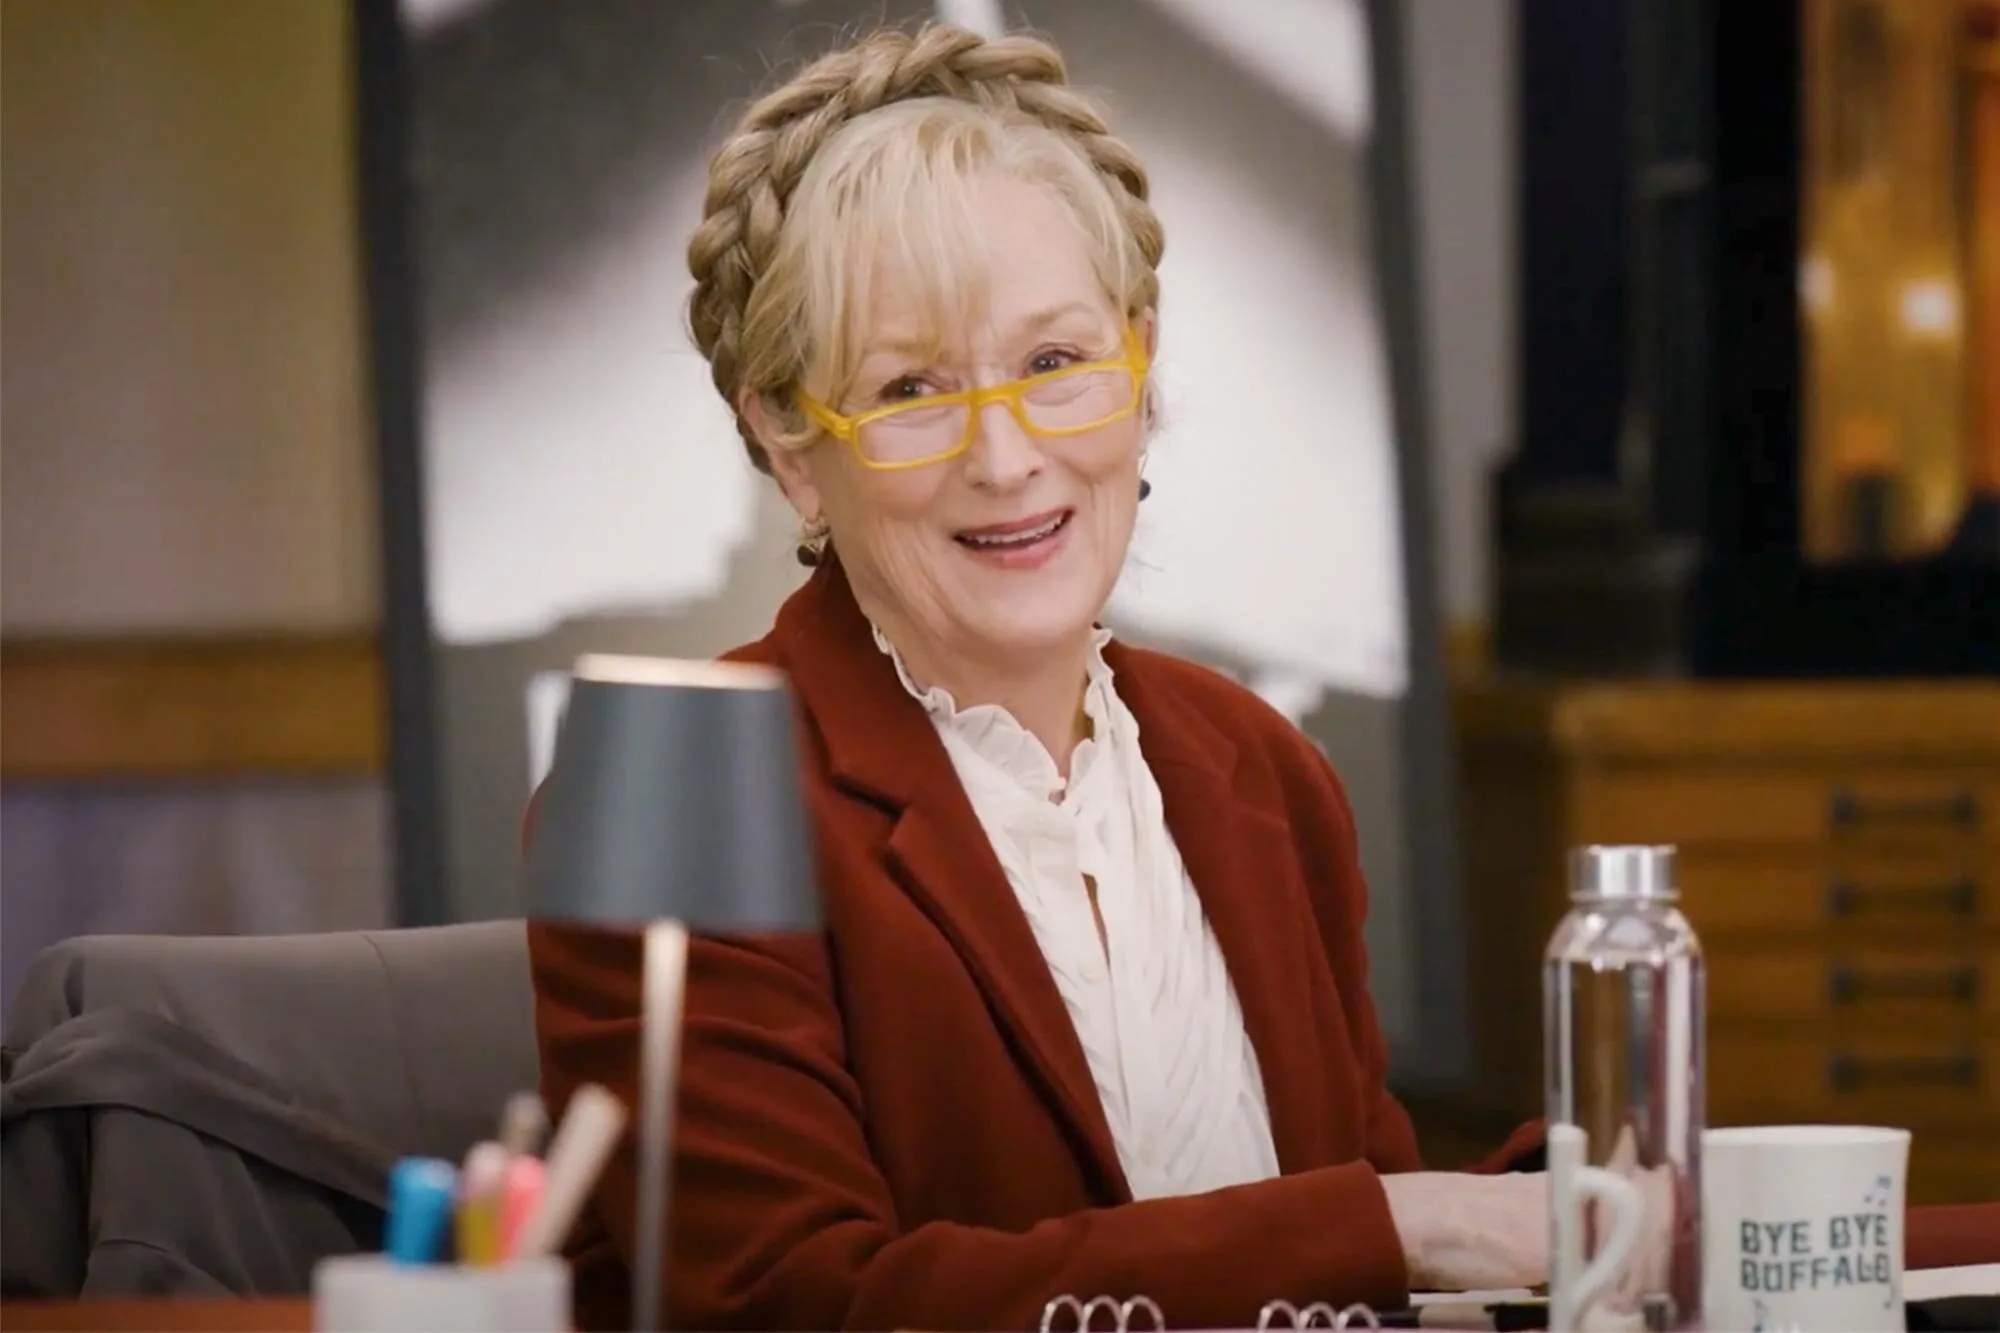 Only Murders In the Building season 3 teaser reveals first look at Meryl Streep